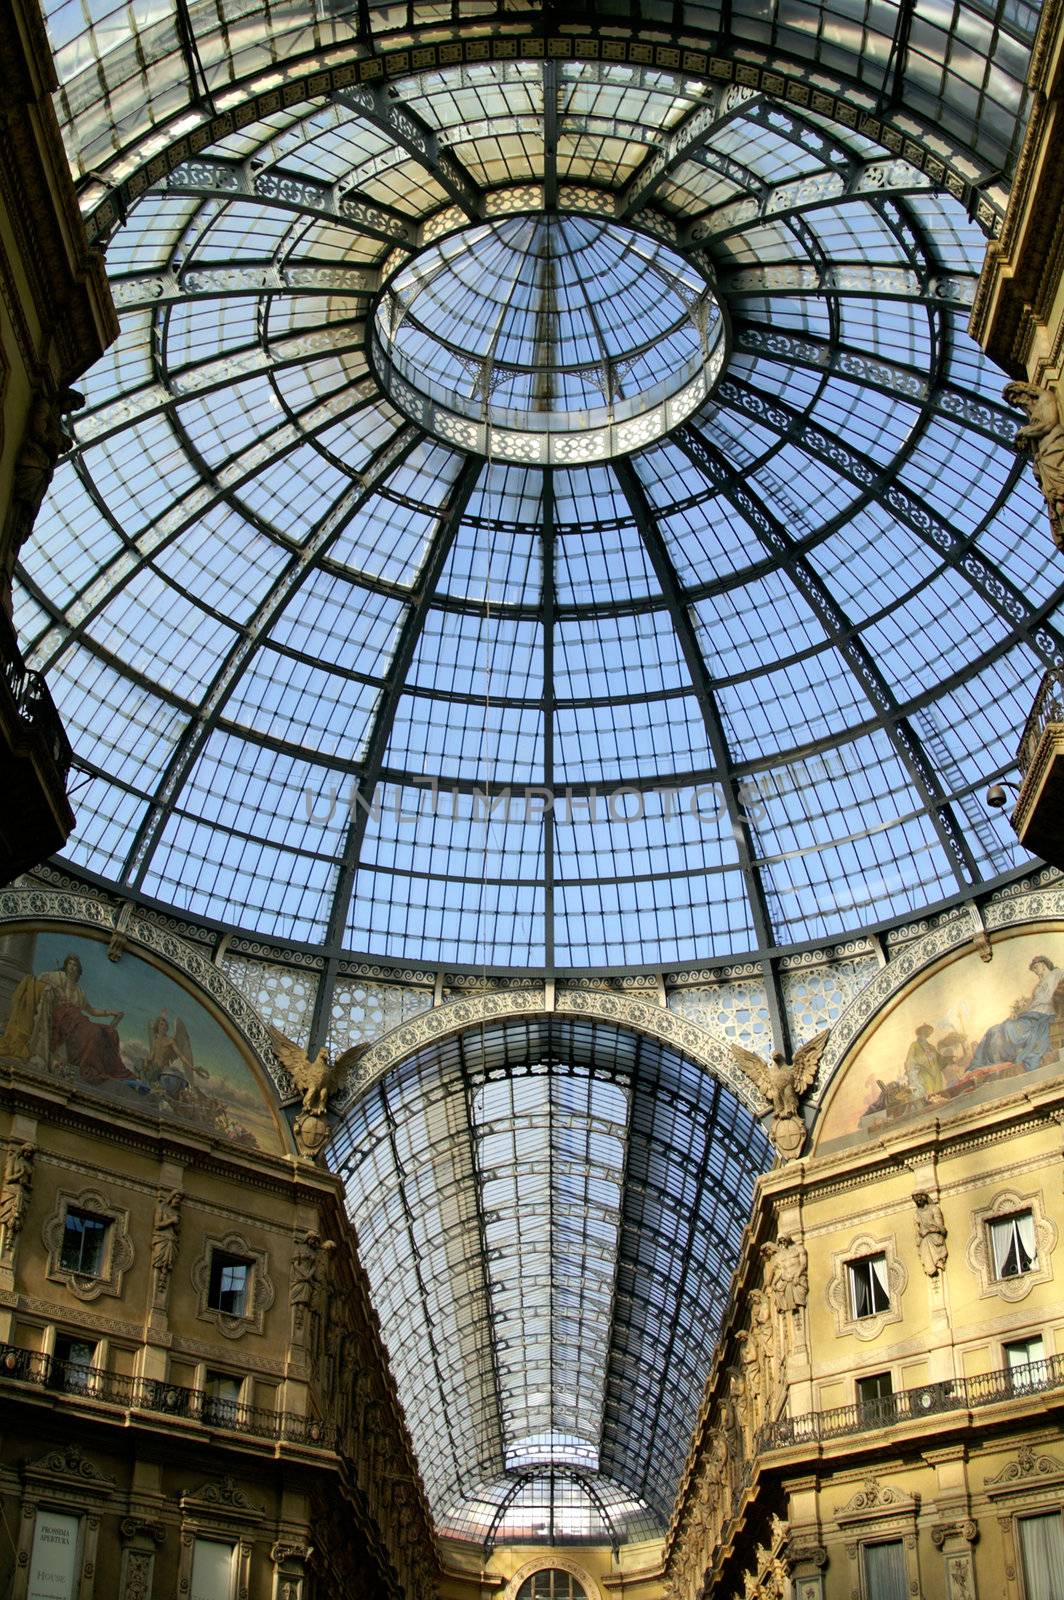 Glass gallery with glass dome and ornaments - Galleria Vittorio Emanuele - Milan Italy